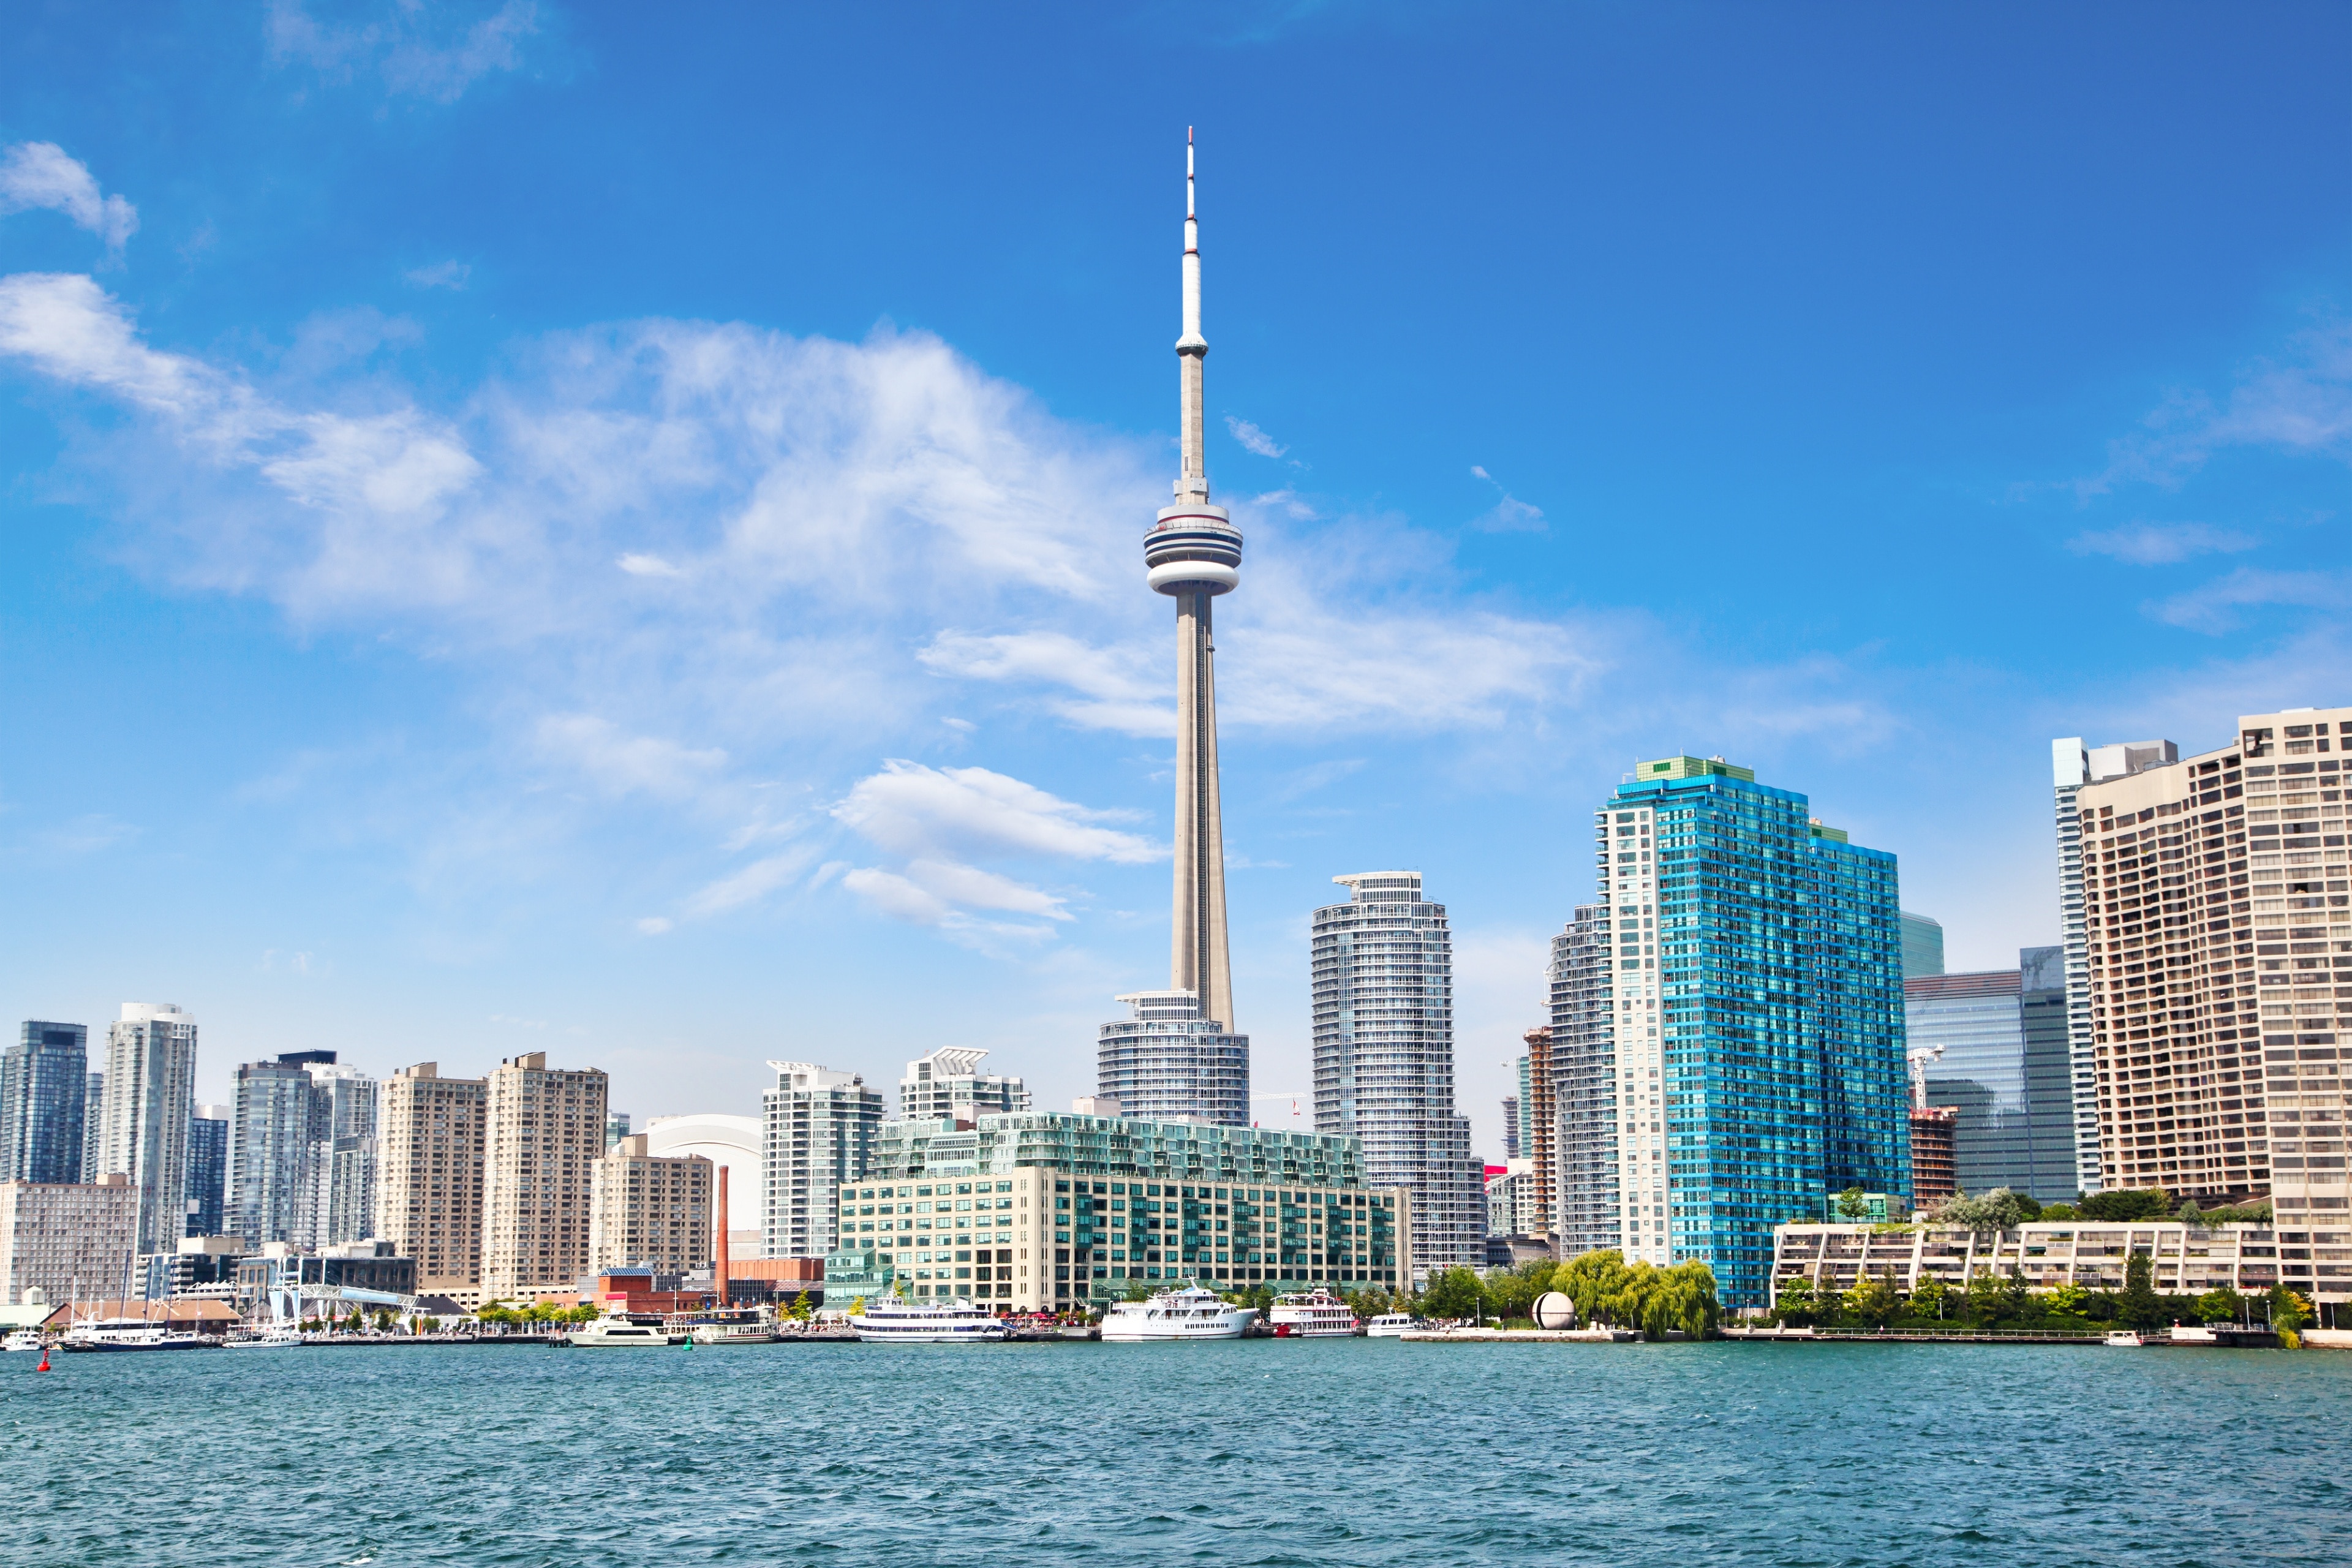 hotels near cn tower in toronto